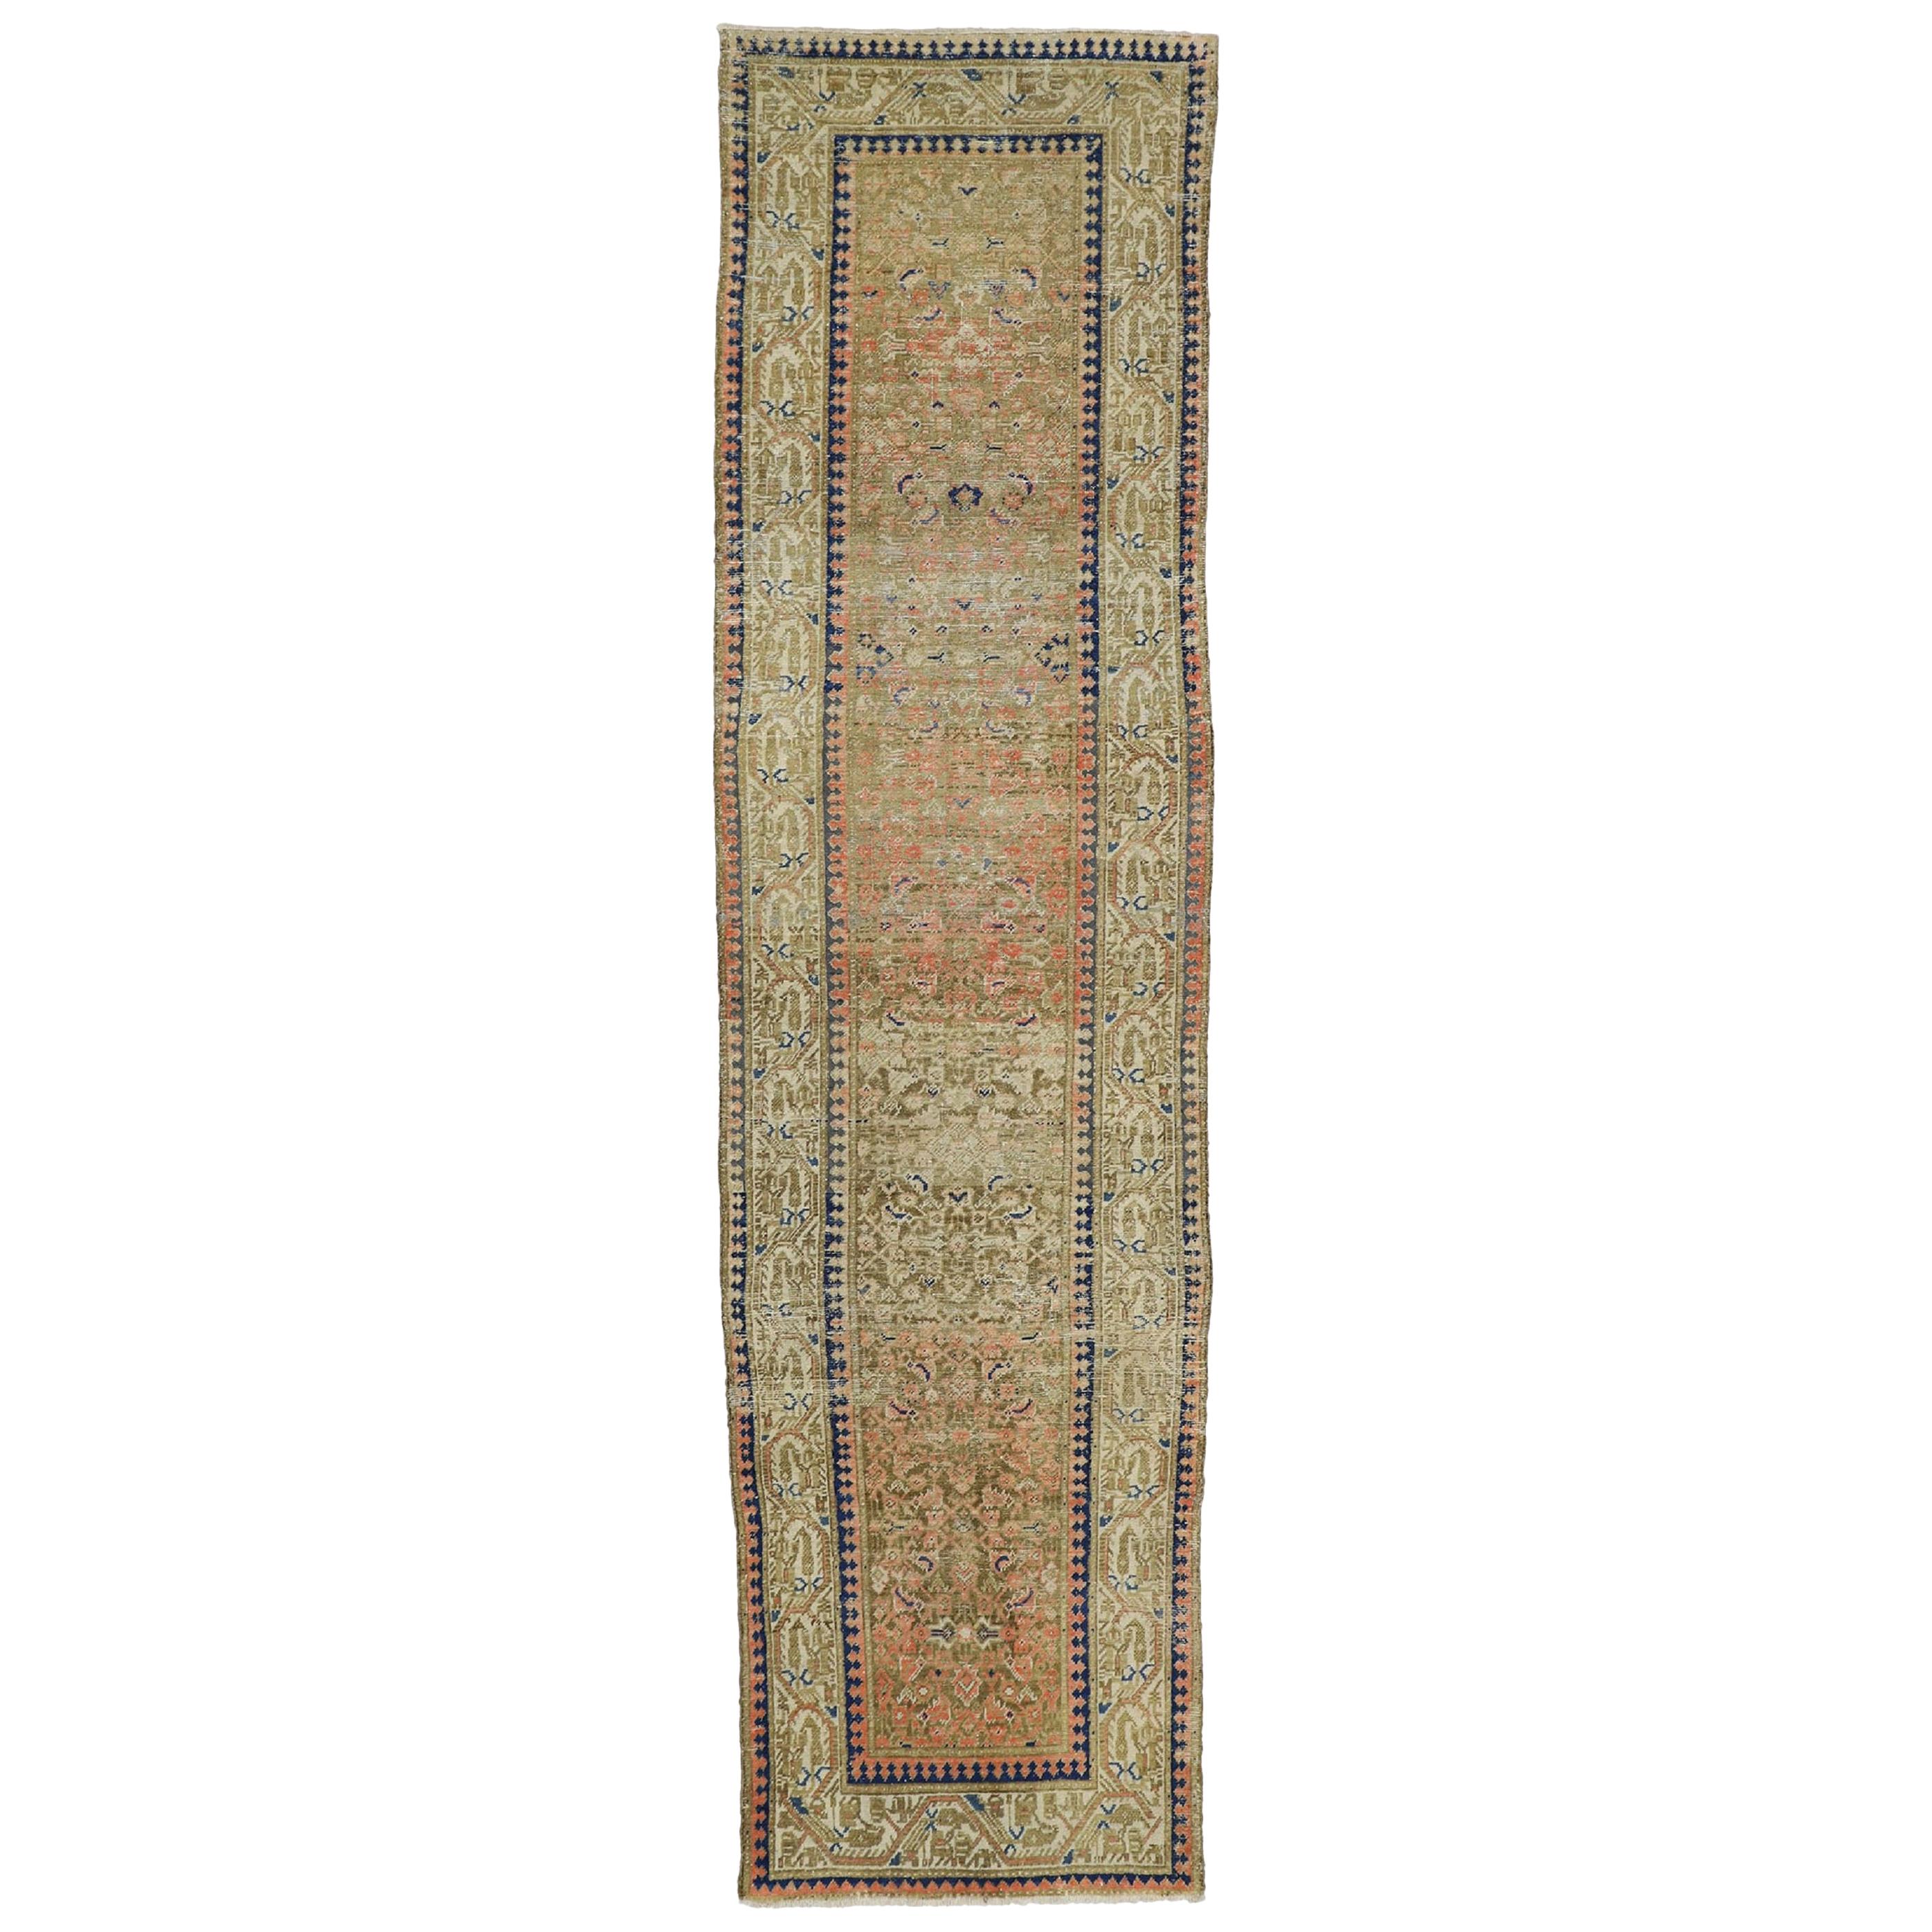 Distressed Vintage Turkish Sivas Runner with Rustic Pacific Northwest Style